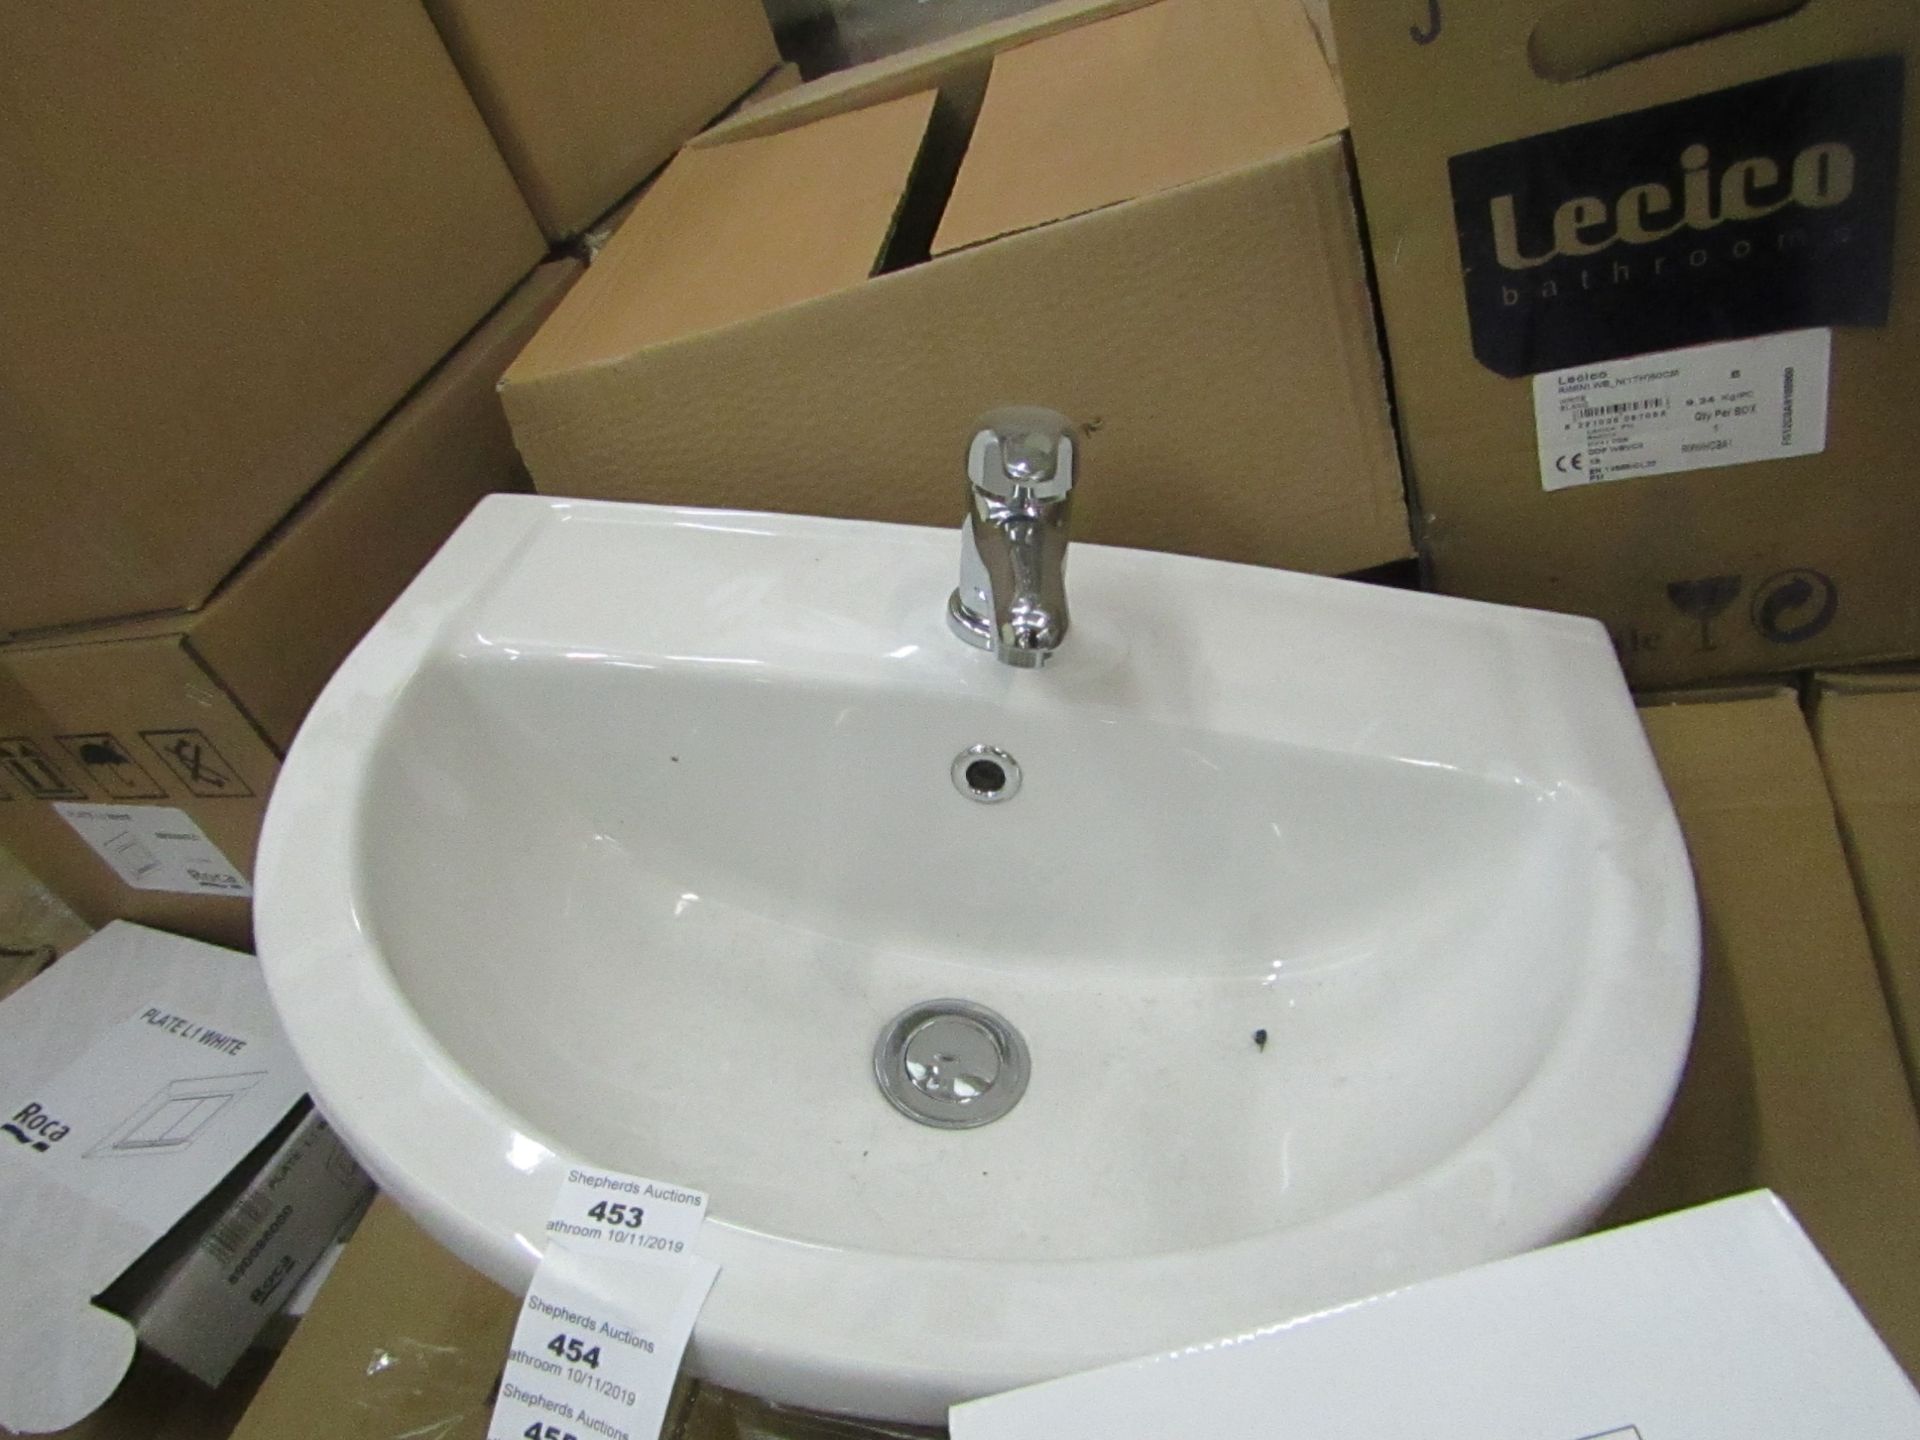 Lecico Senner 500mm 1 tap hole sink with a mono block mixer, new and boxed.